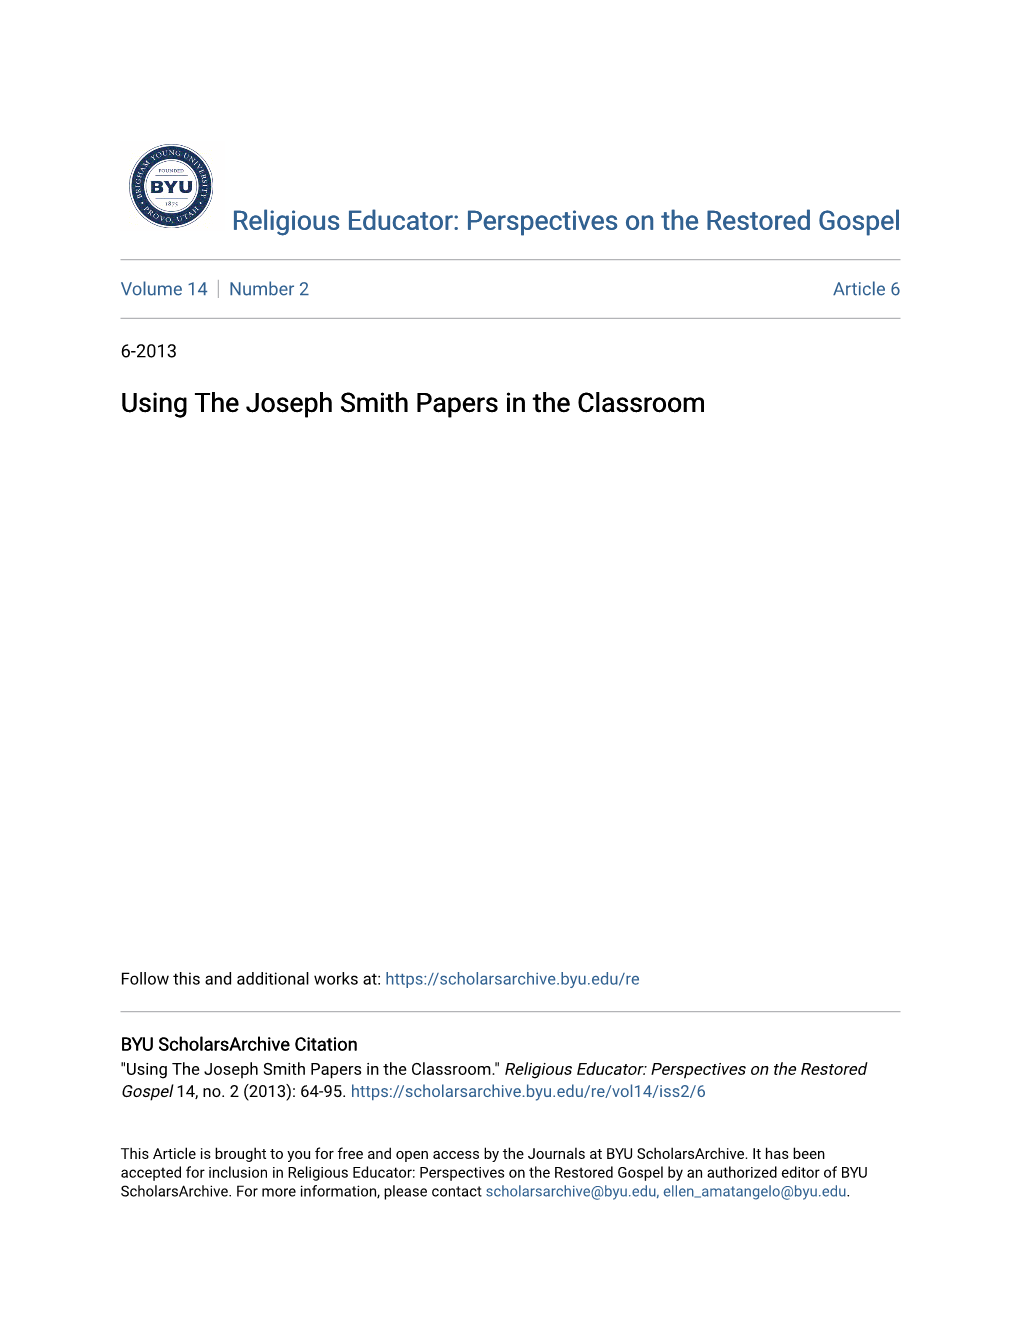 Using the Joseph Smith Papers in the Classroom